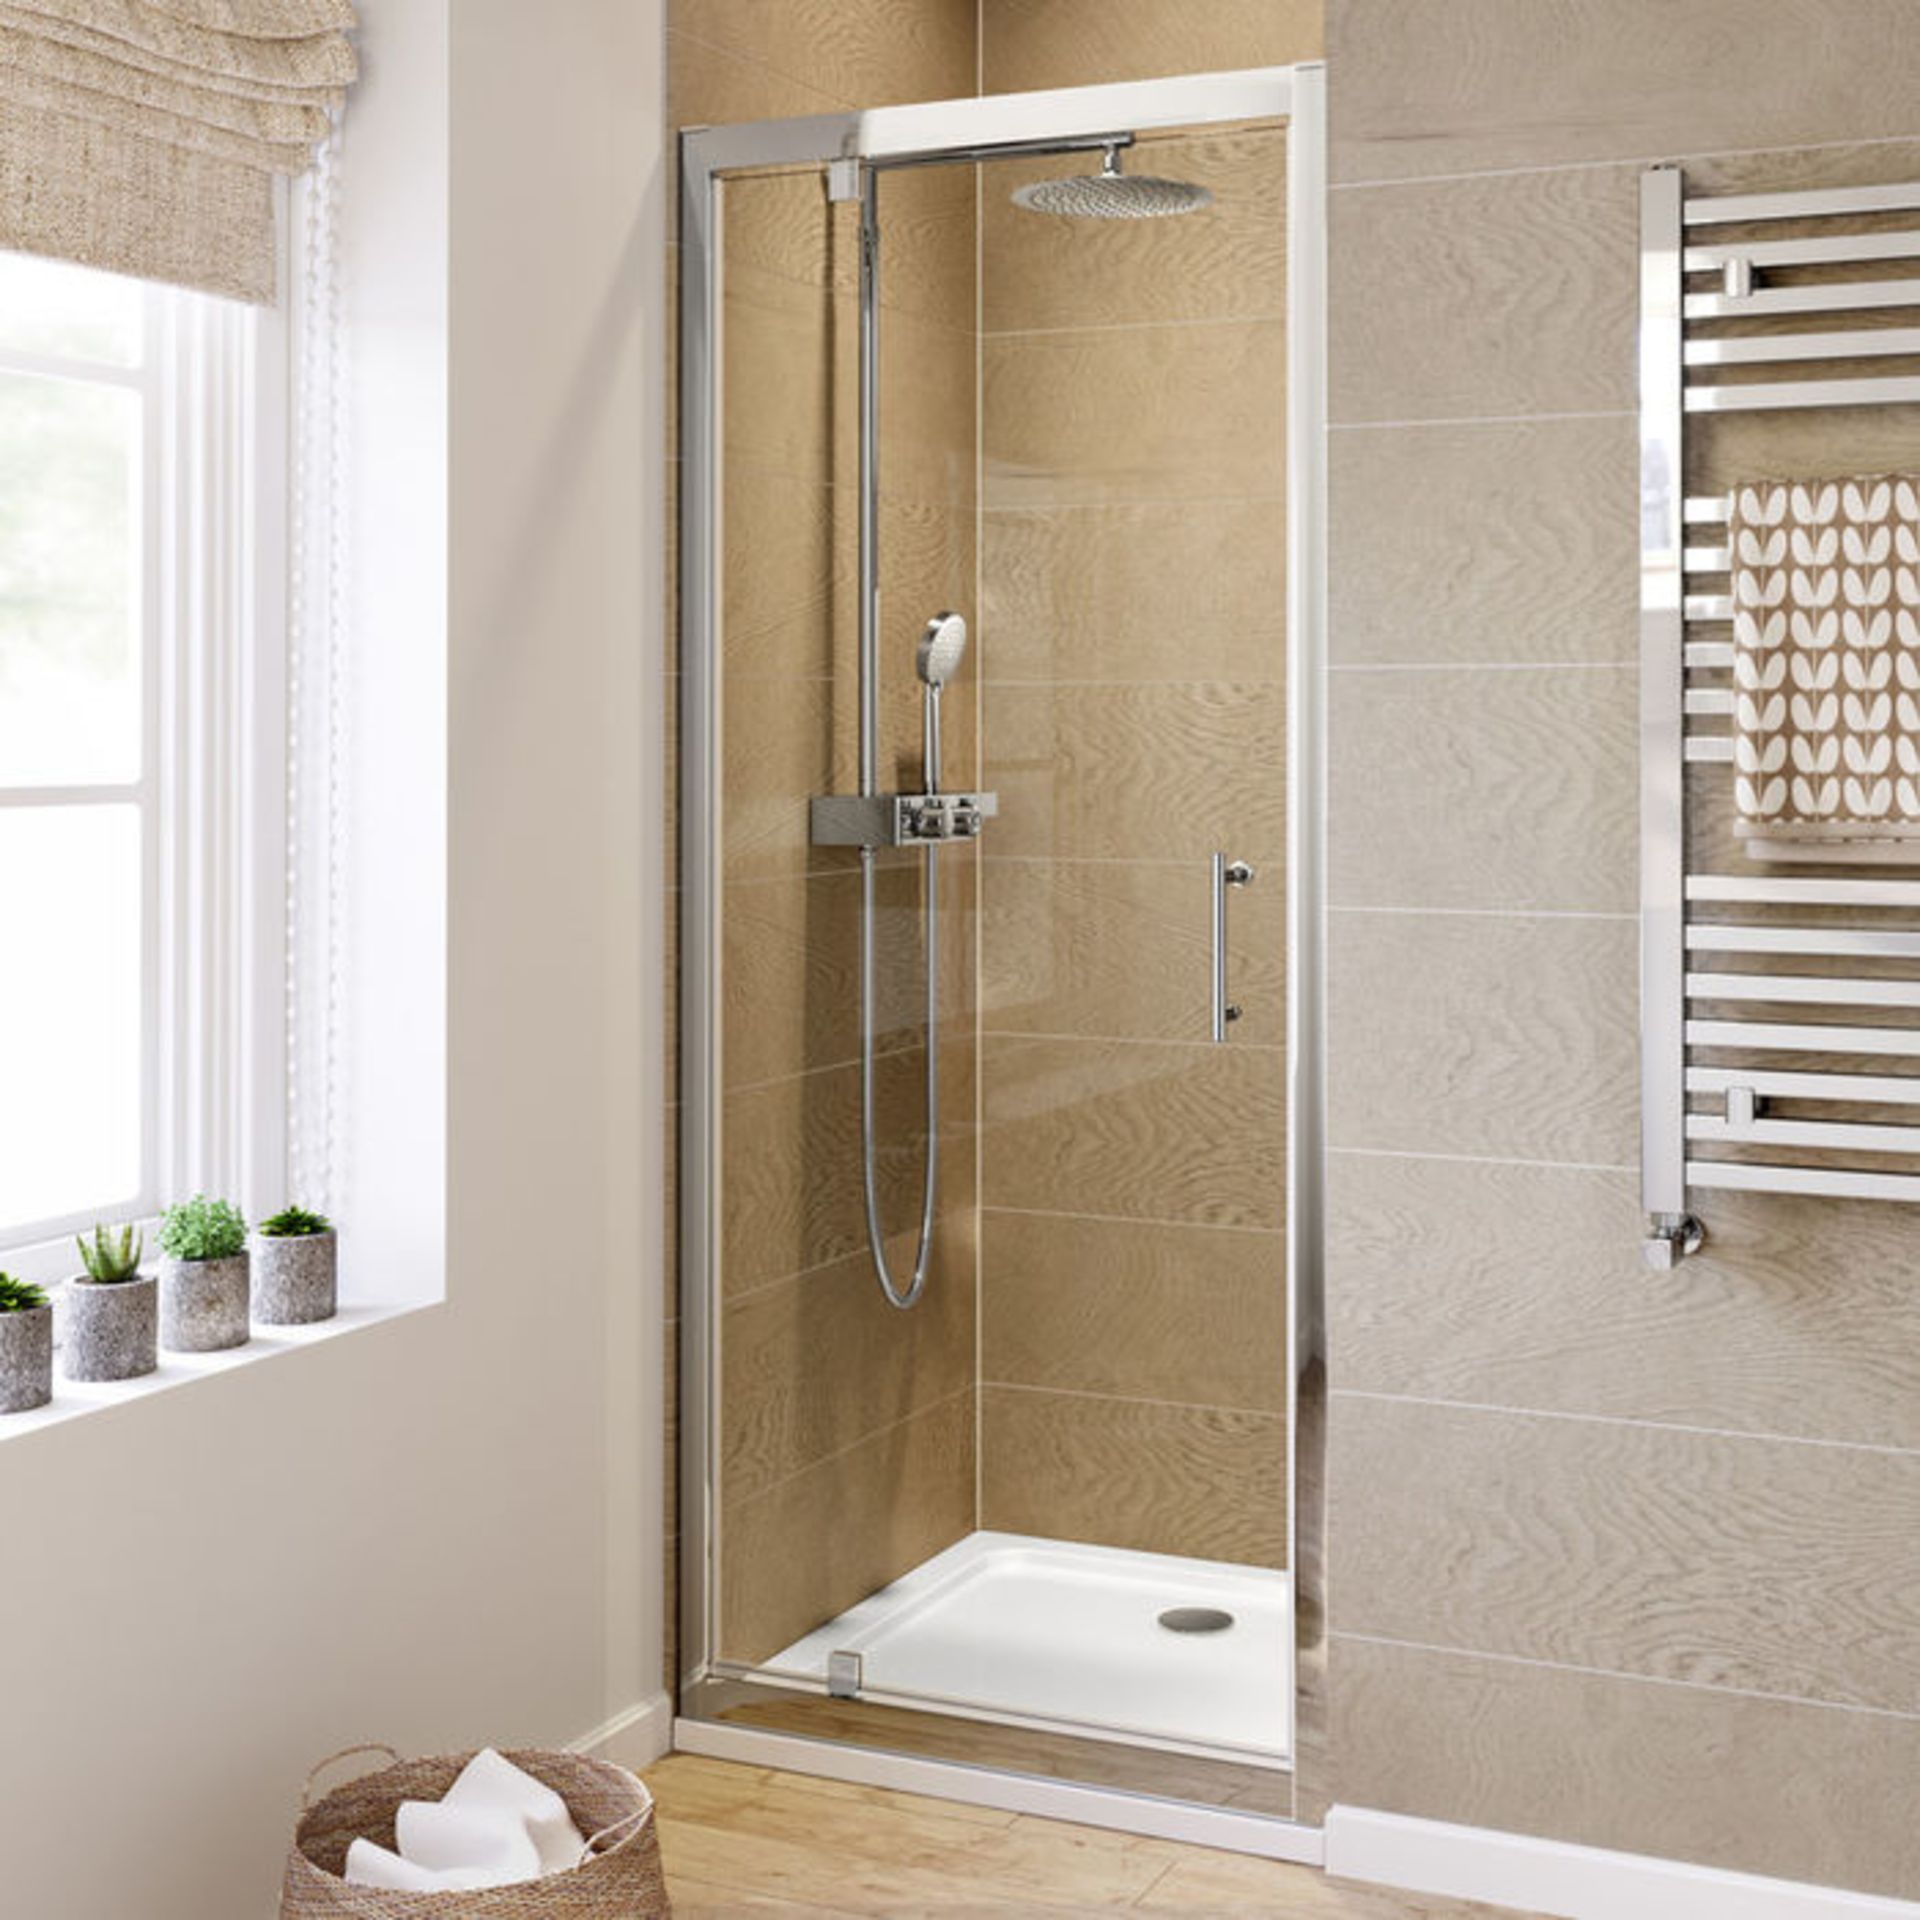 (EW208) 760mm 6mm - Elements Pivot Shower Door. RRP £299.99. 6mm Safety Glass Fully waterproof - Image 5 of 9